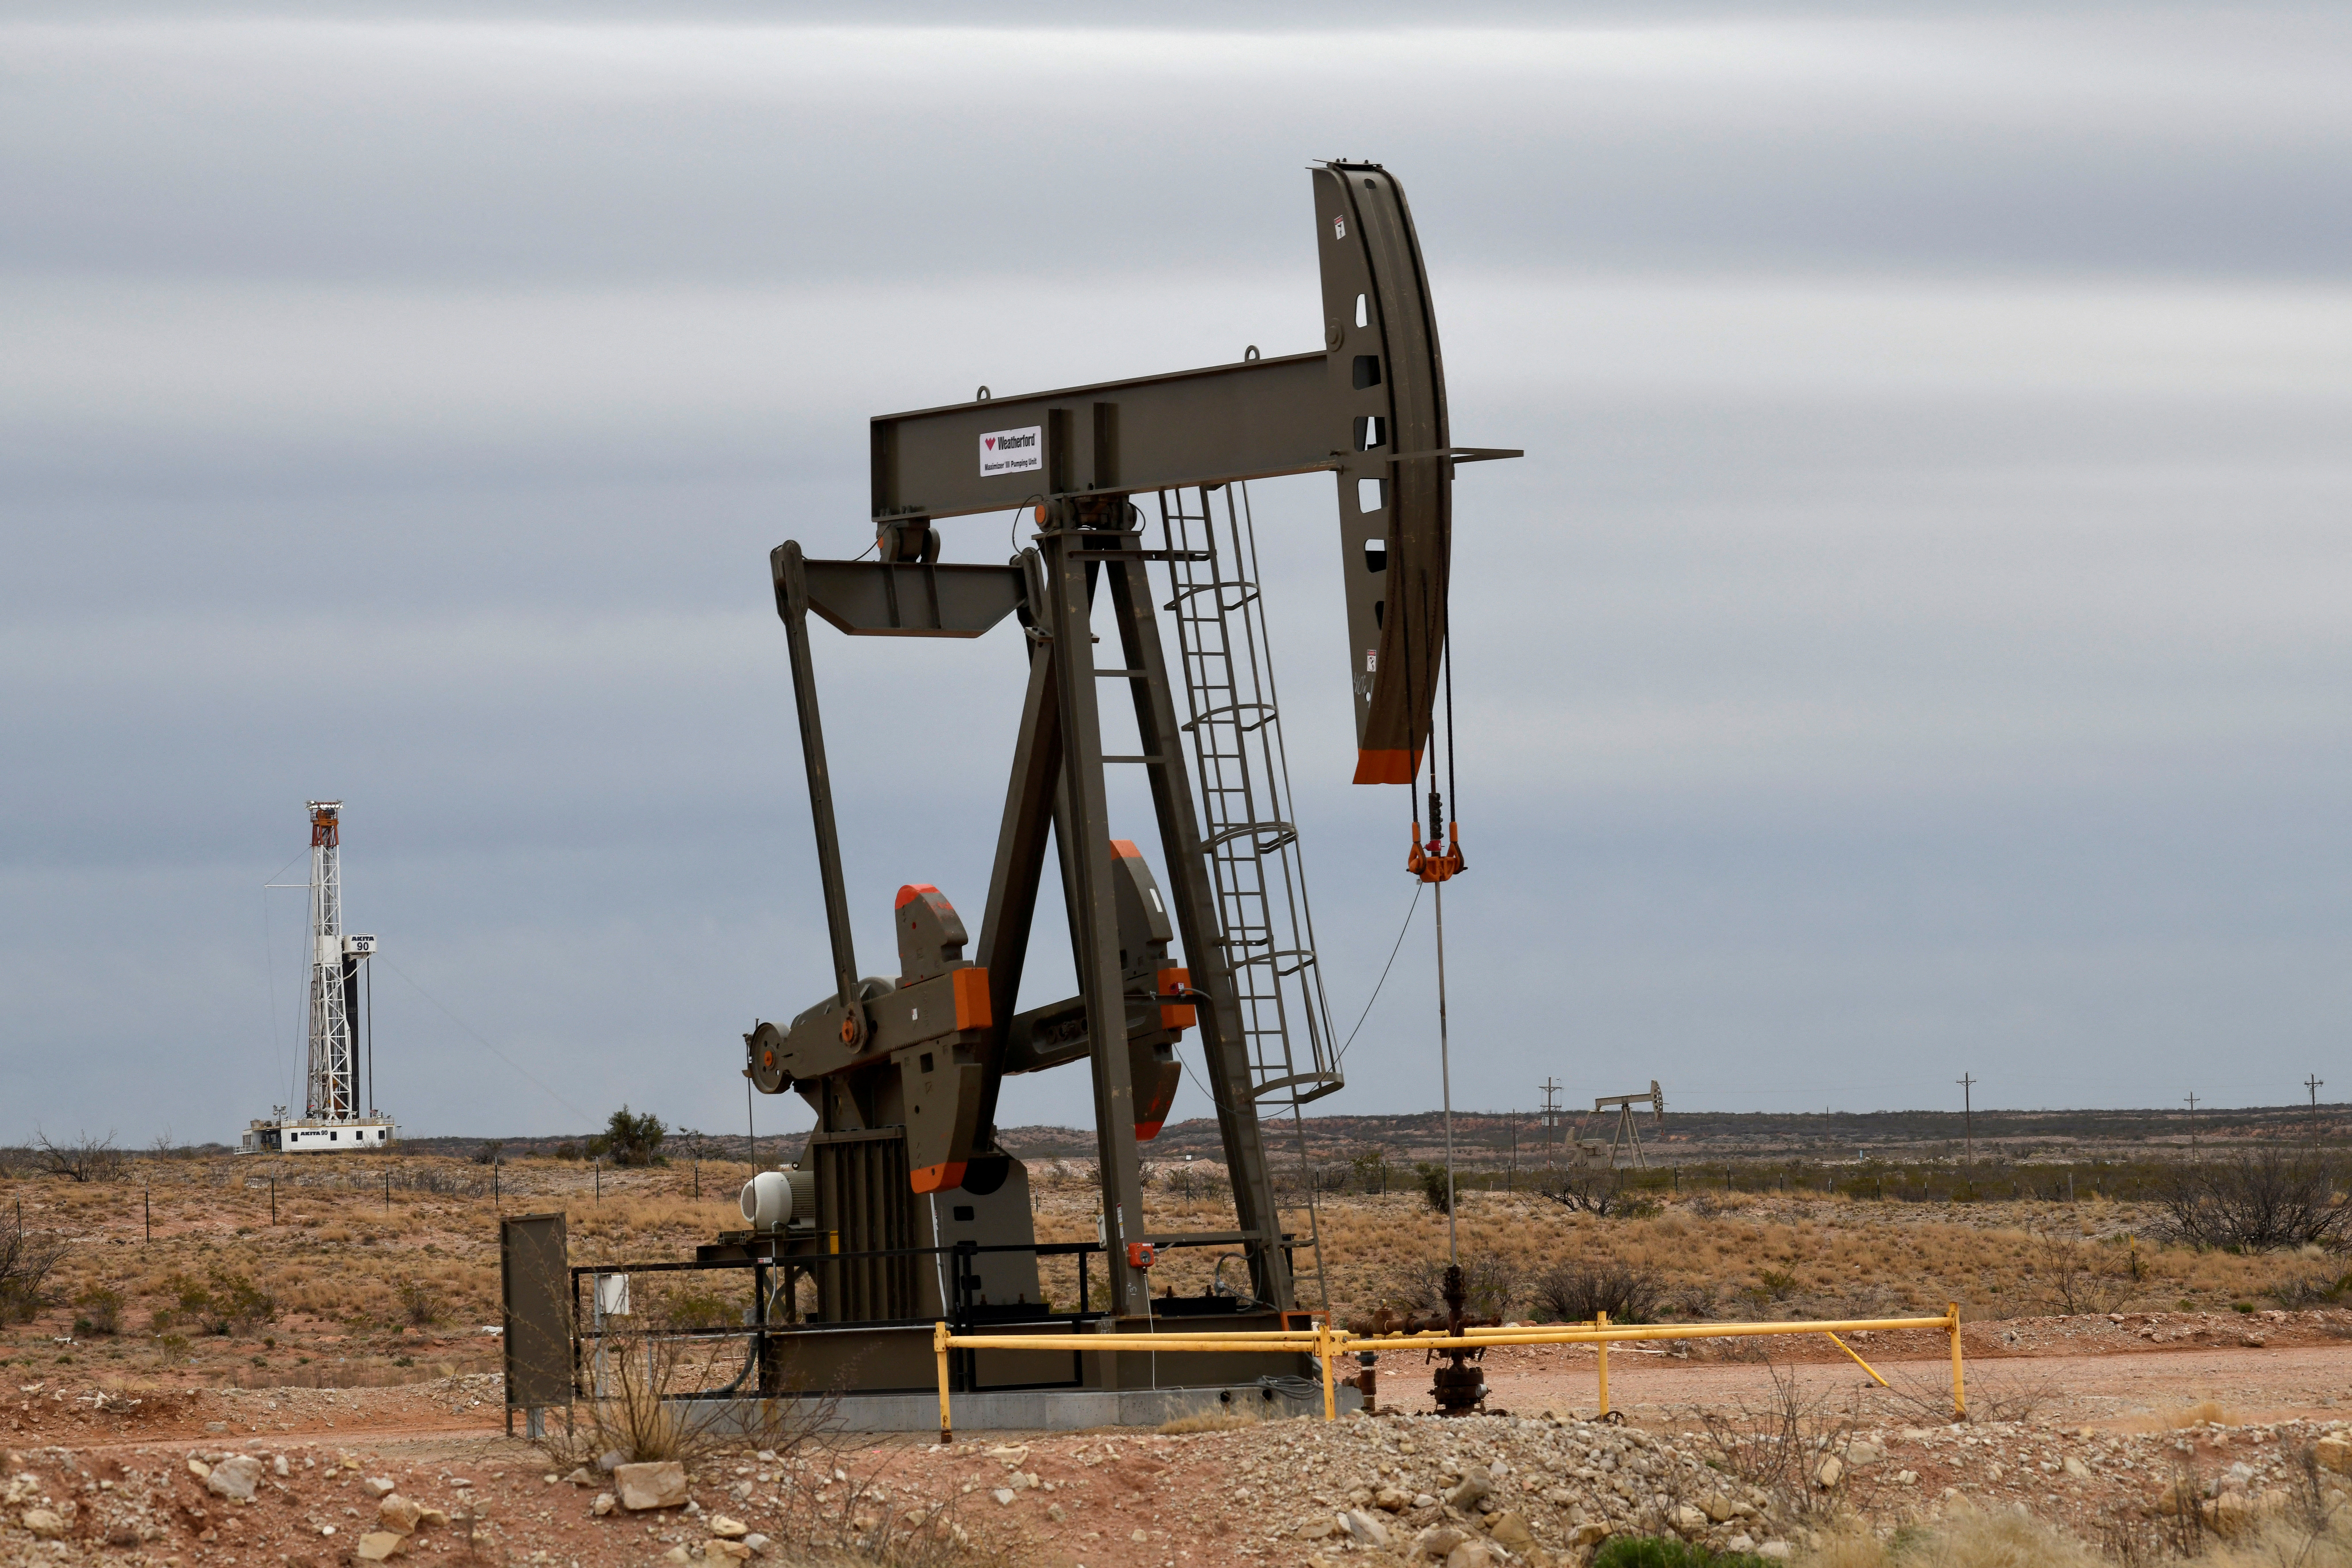 A pump jack operates in front of a drilling rig owned by Exxon near Carlsbad